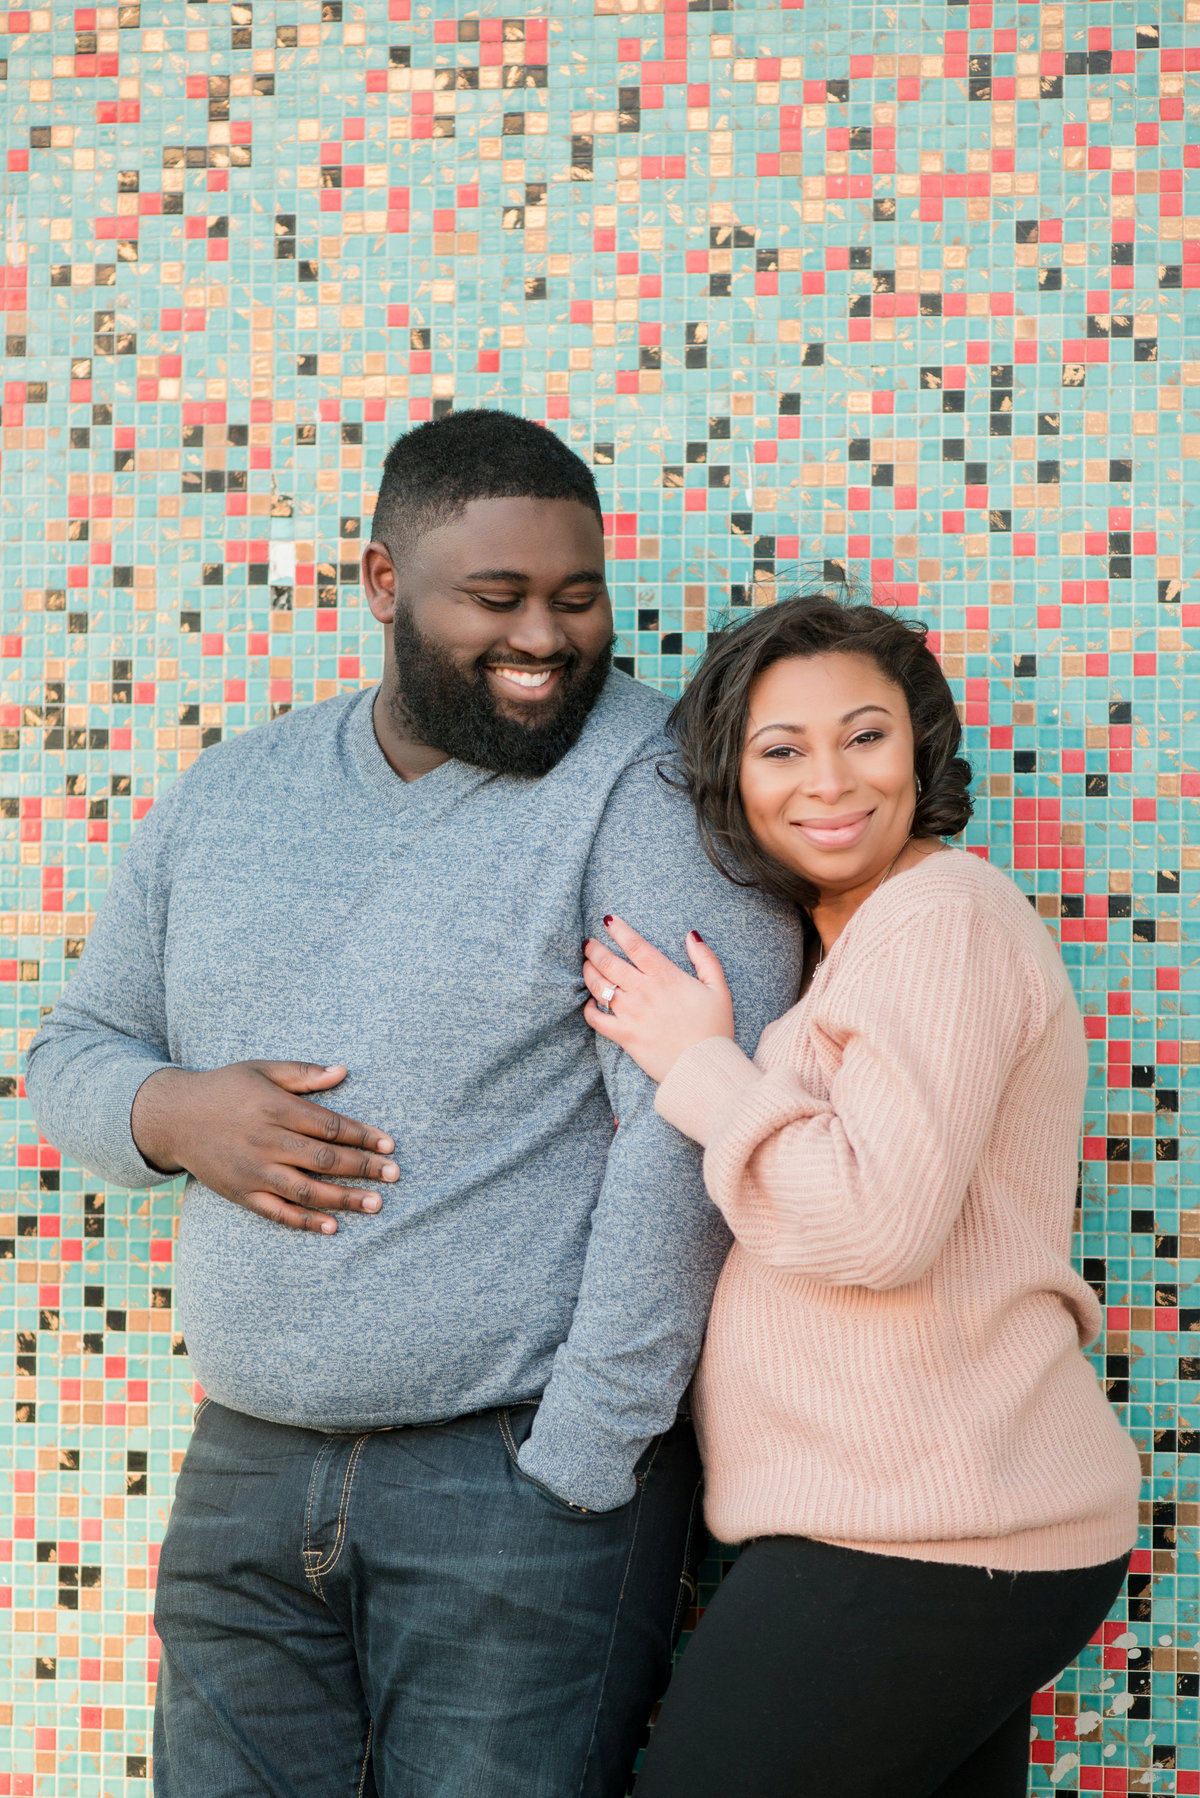 kiana-don-asbury-park-engagement-session-imagery-by-marianne-2017-52